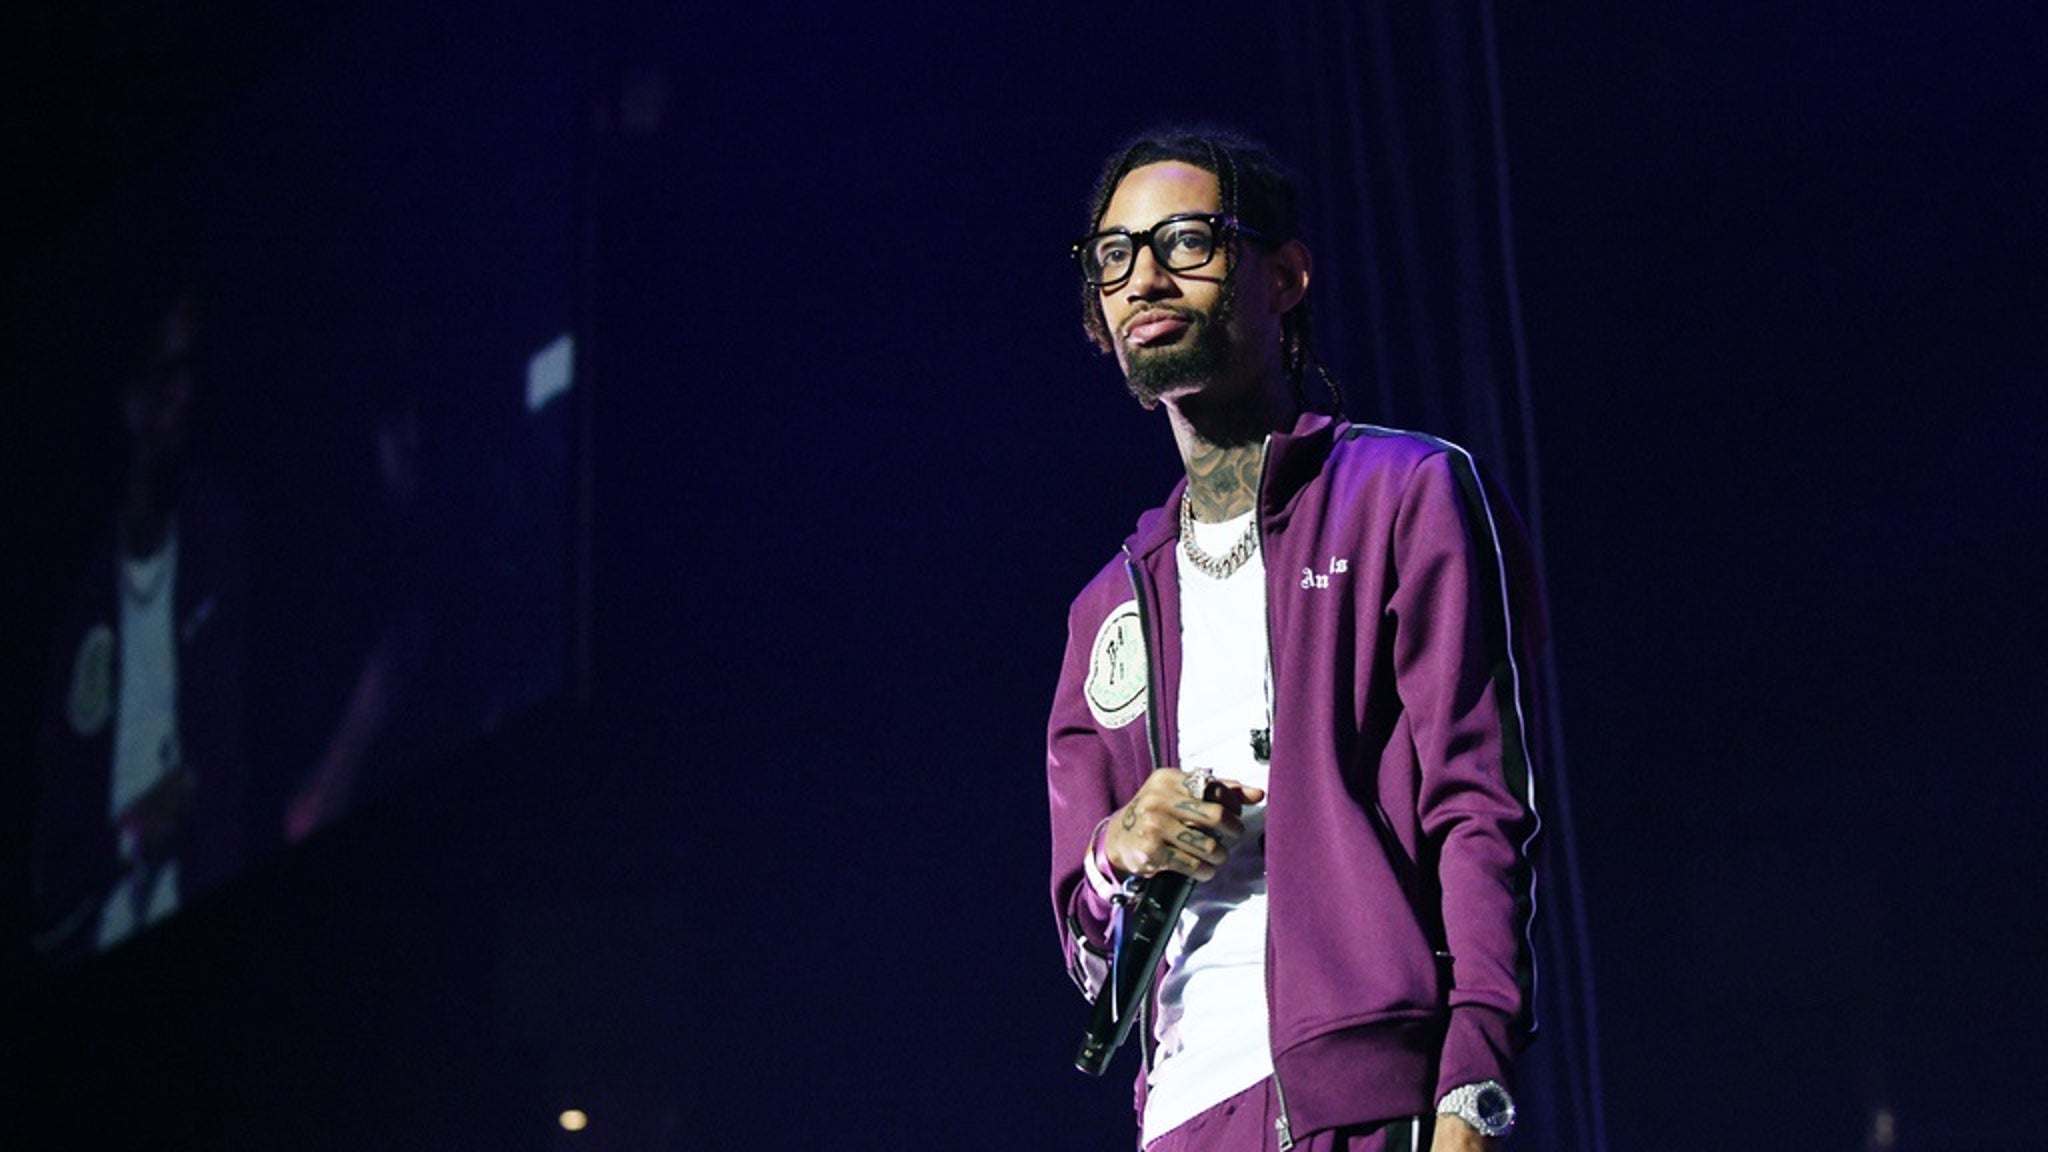 Rapper PnB Rock dies at 30 after filming at Roscoe